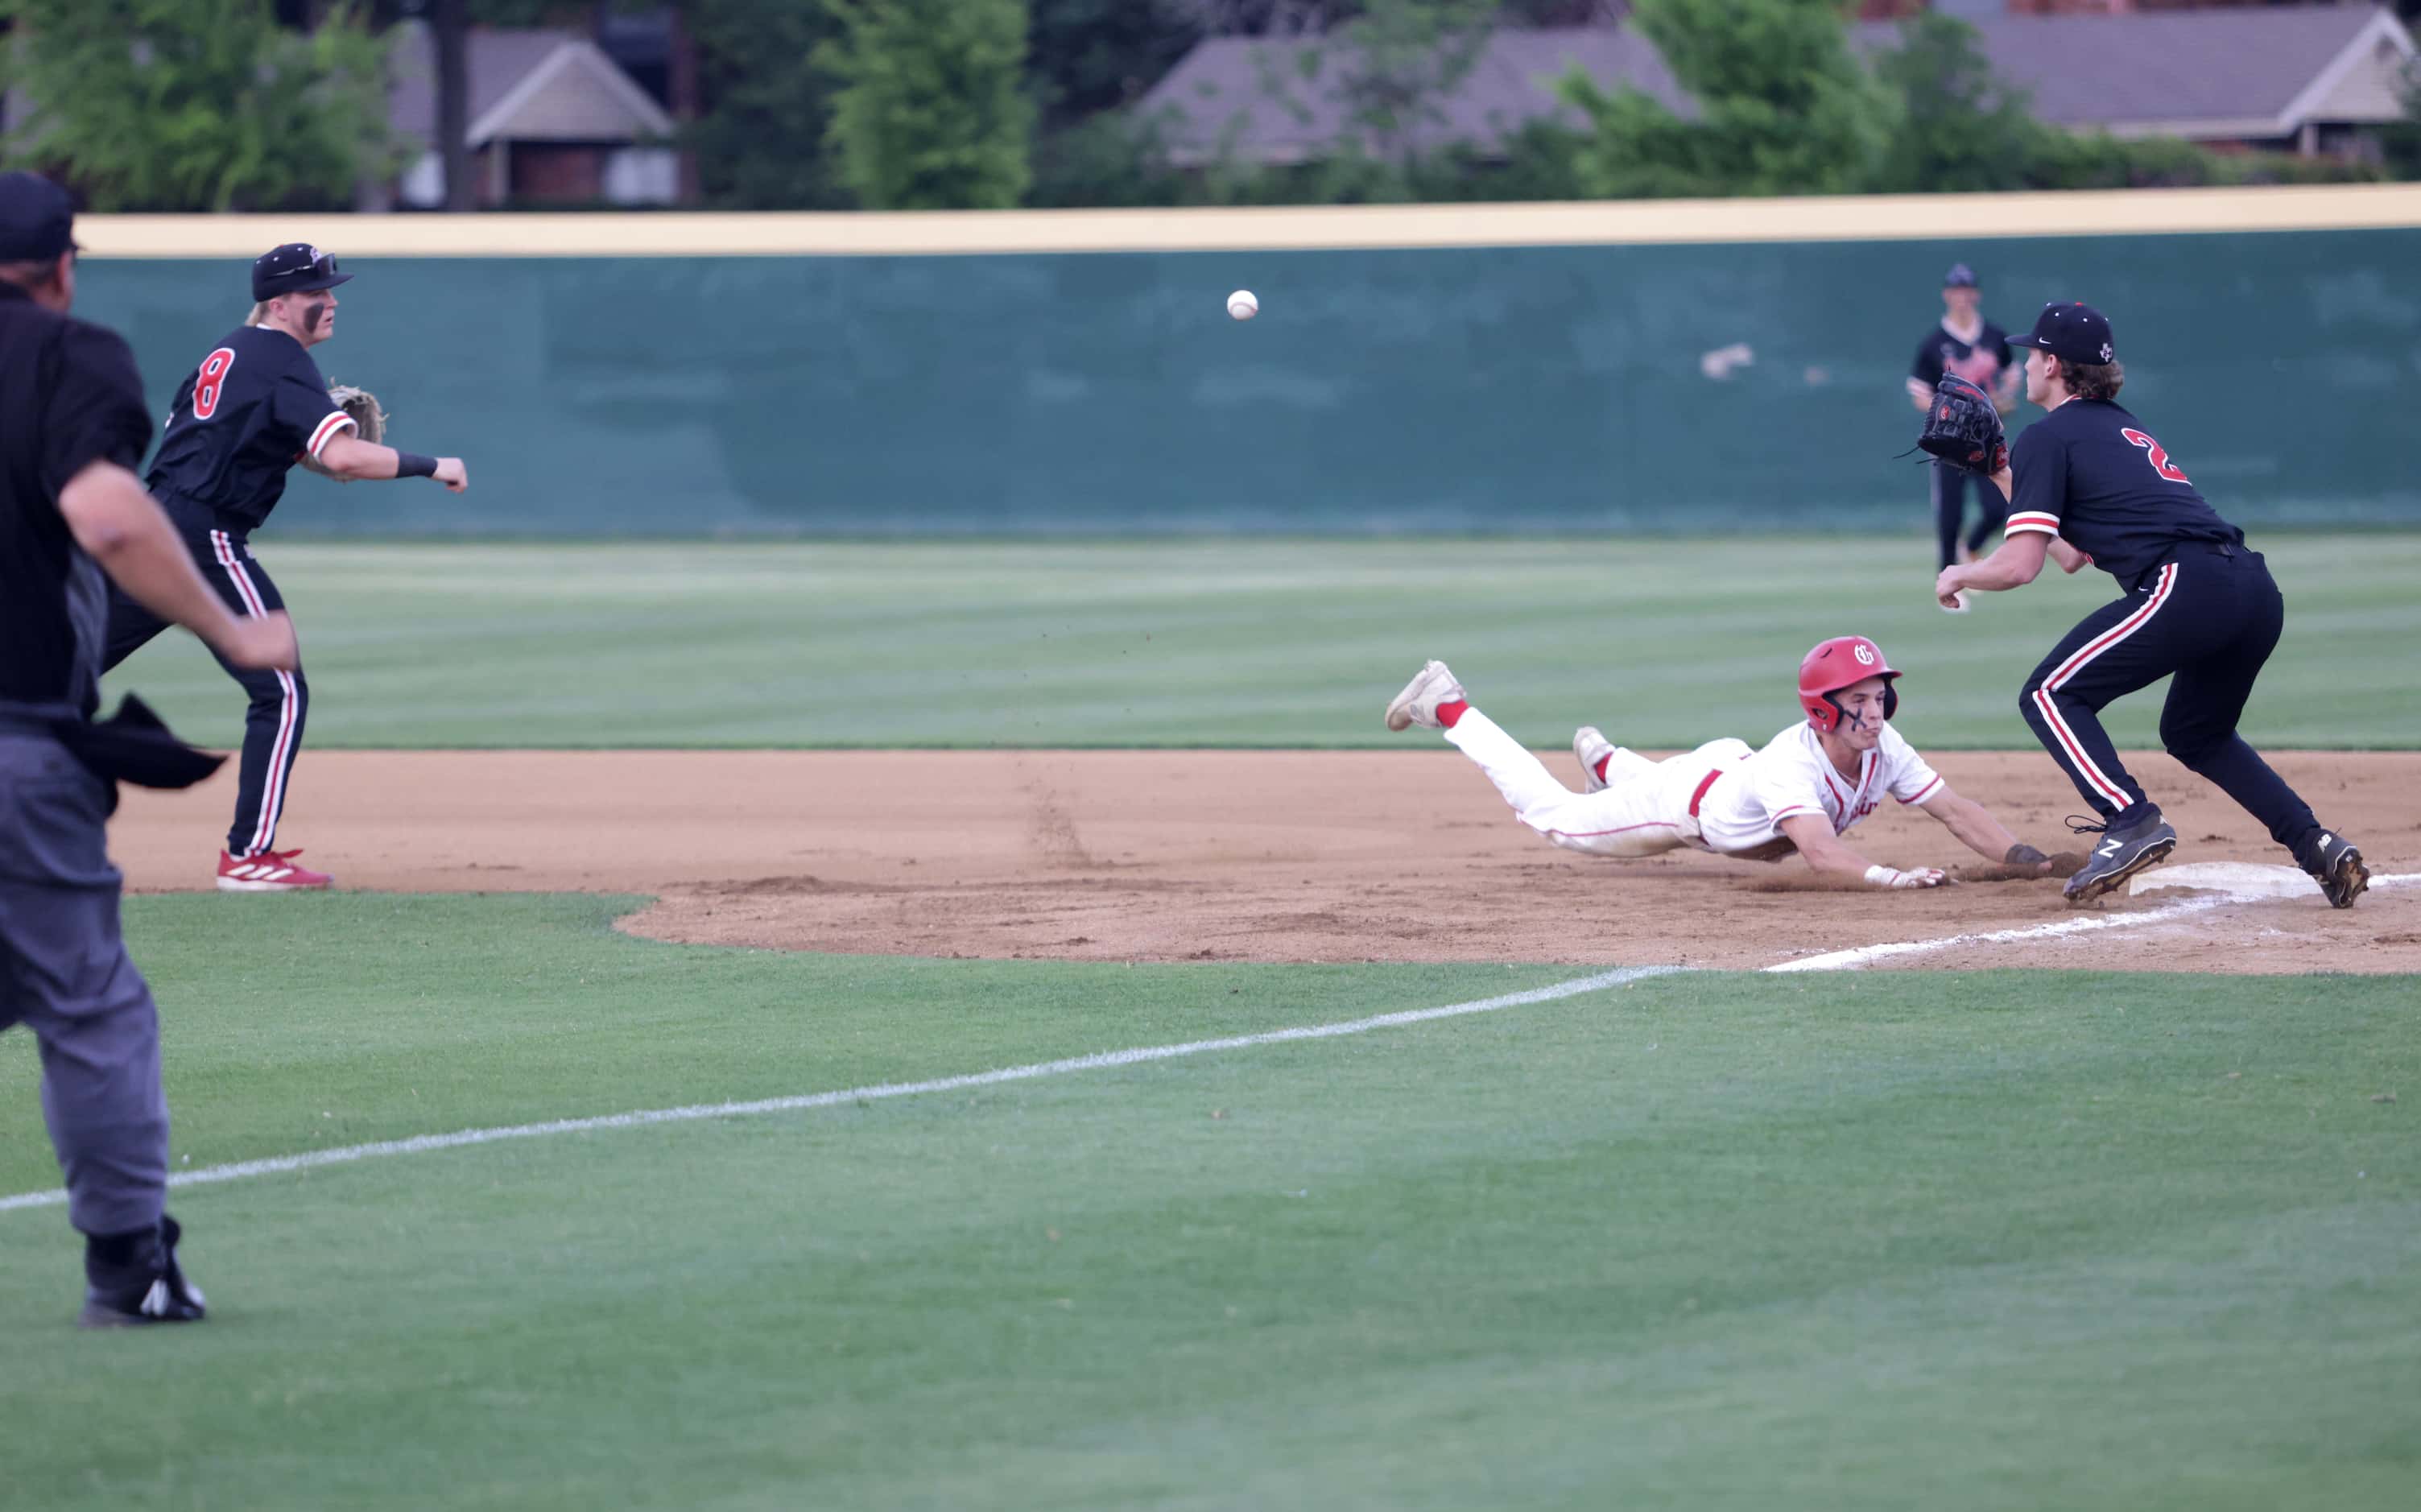 Grapevine High School player Sammy Kelley slides to beat the ball during a baseball game...